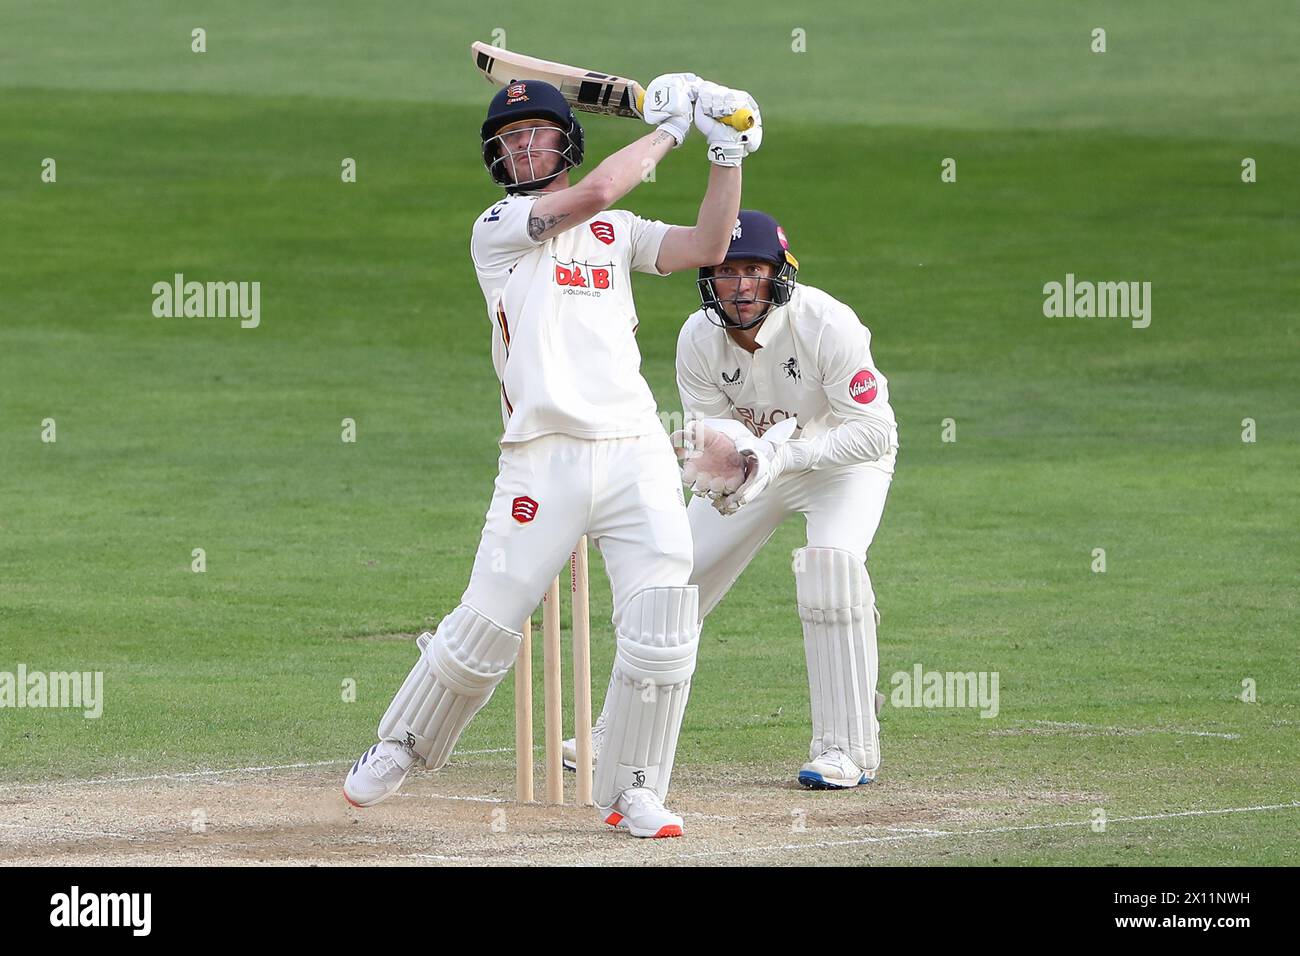 Jordan Cox hits 6 runs for Essex during Essex CCC vs Kent CCC, Vitality County Championship Division 1 Cricket at The Cloud County Ground on 14th Apri Stock Photo